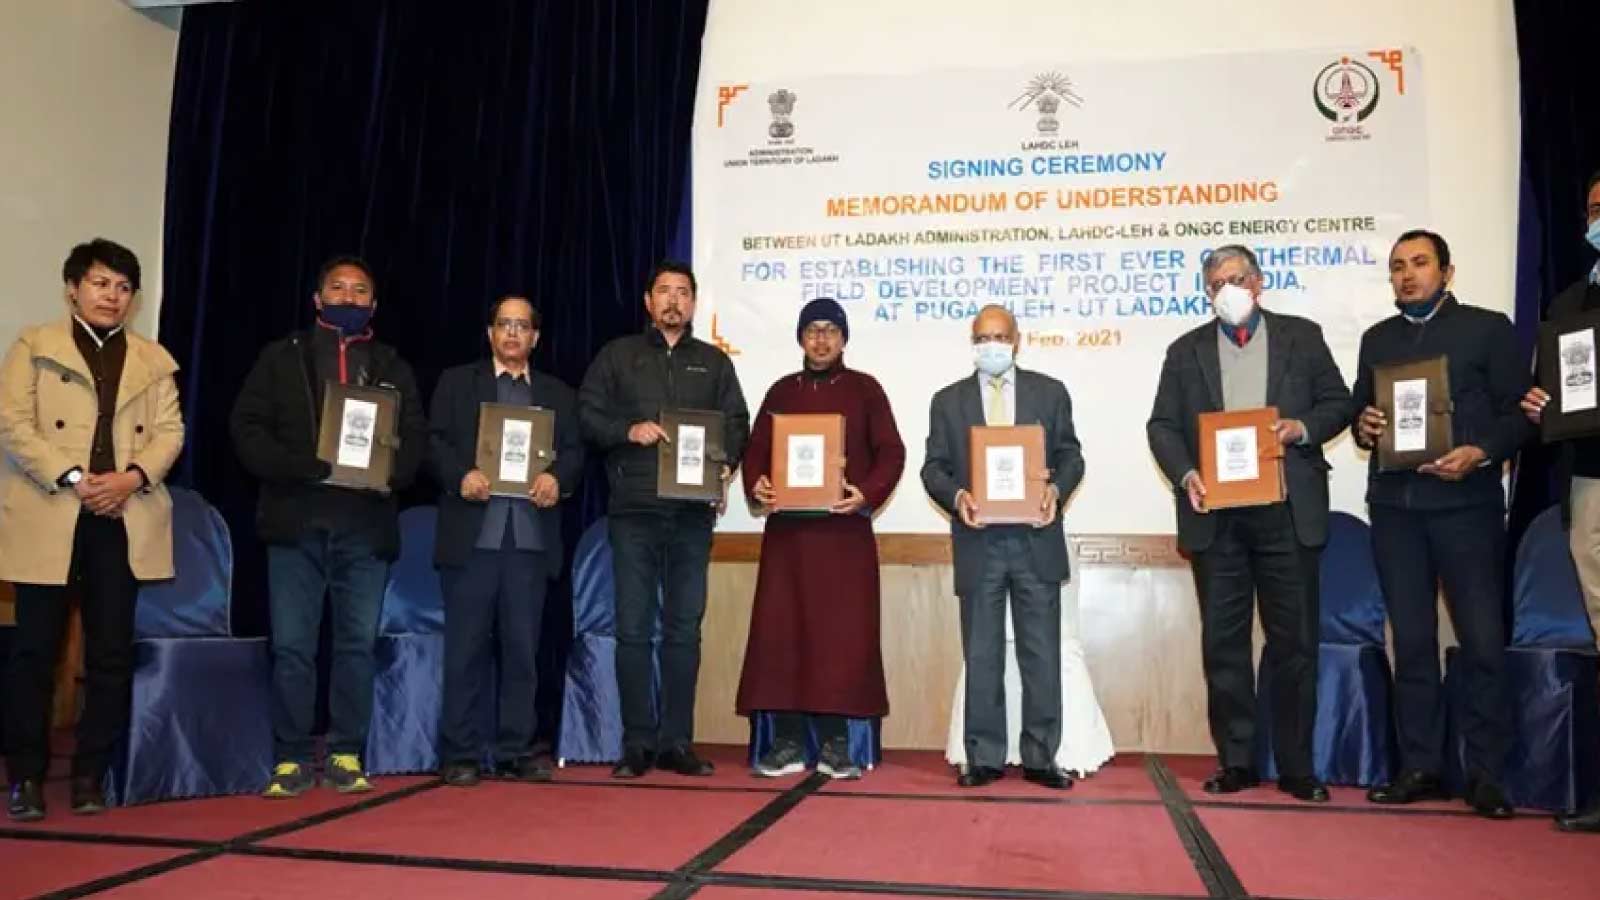 India’s first geothermal field development project in Ladakh established by ONGC